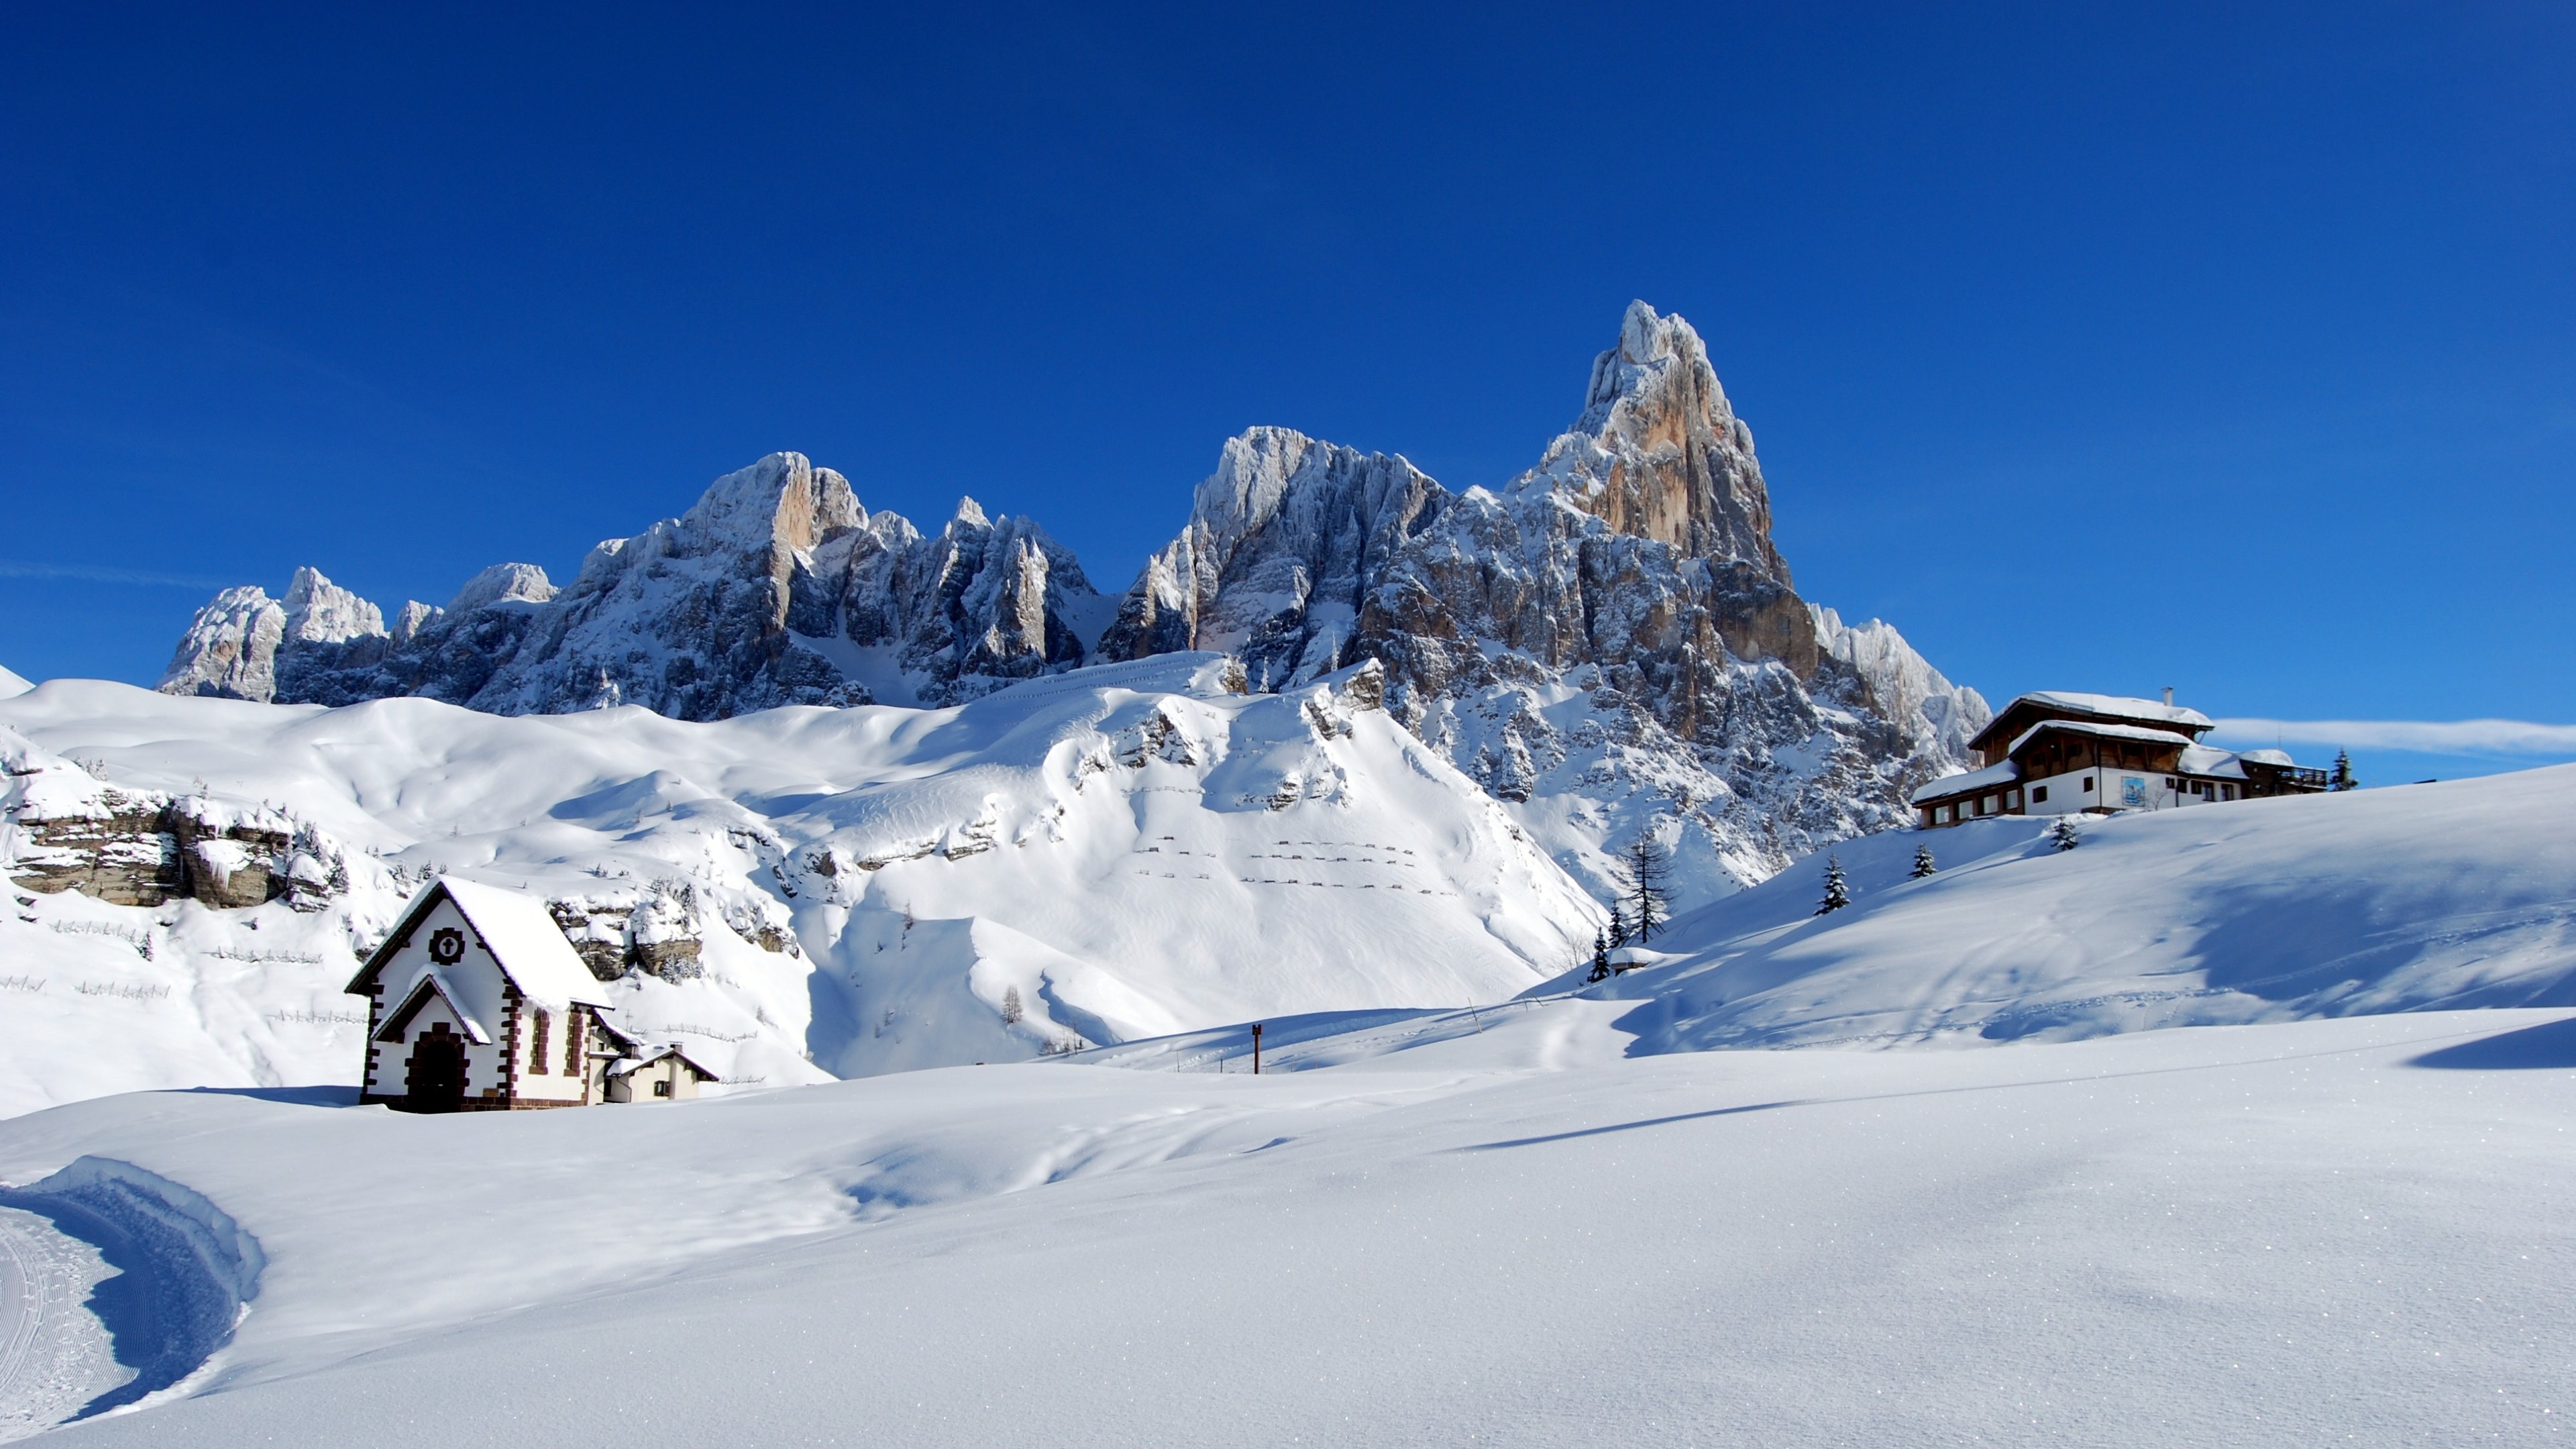 Dolomites Alps Italy Winter Snow HD Wallpapers 4K Wallpapers